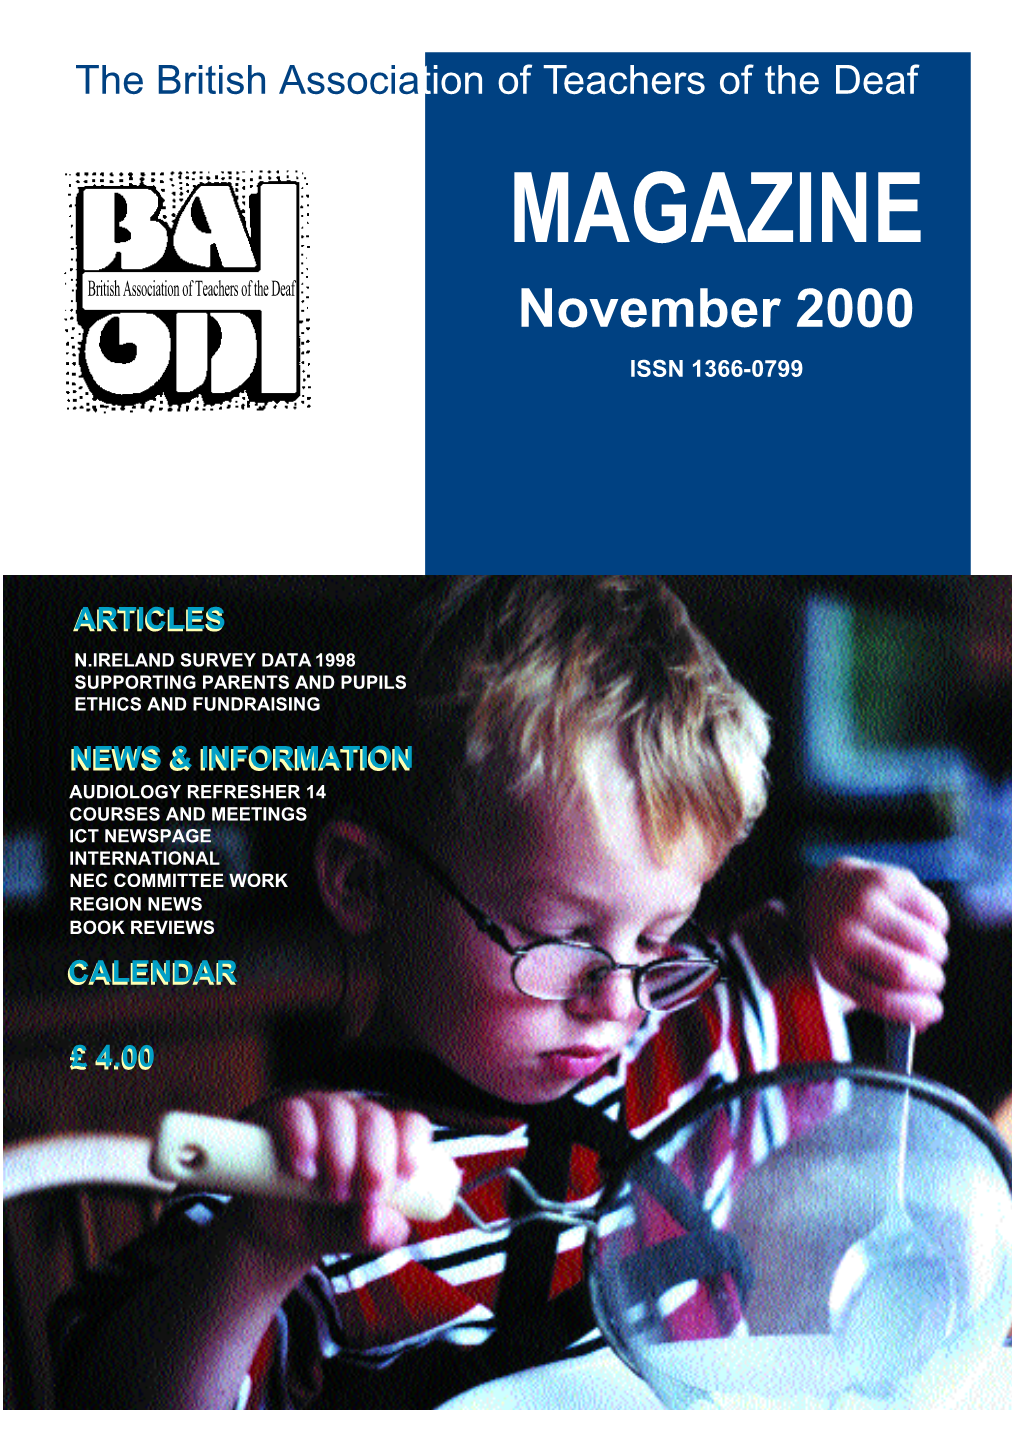 The British Association of Teachers of the Deaf MAGAZINE British Association of Teachers of the Deaf November 2000 ISSN 1366-0799